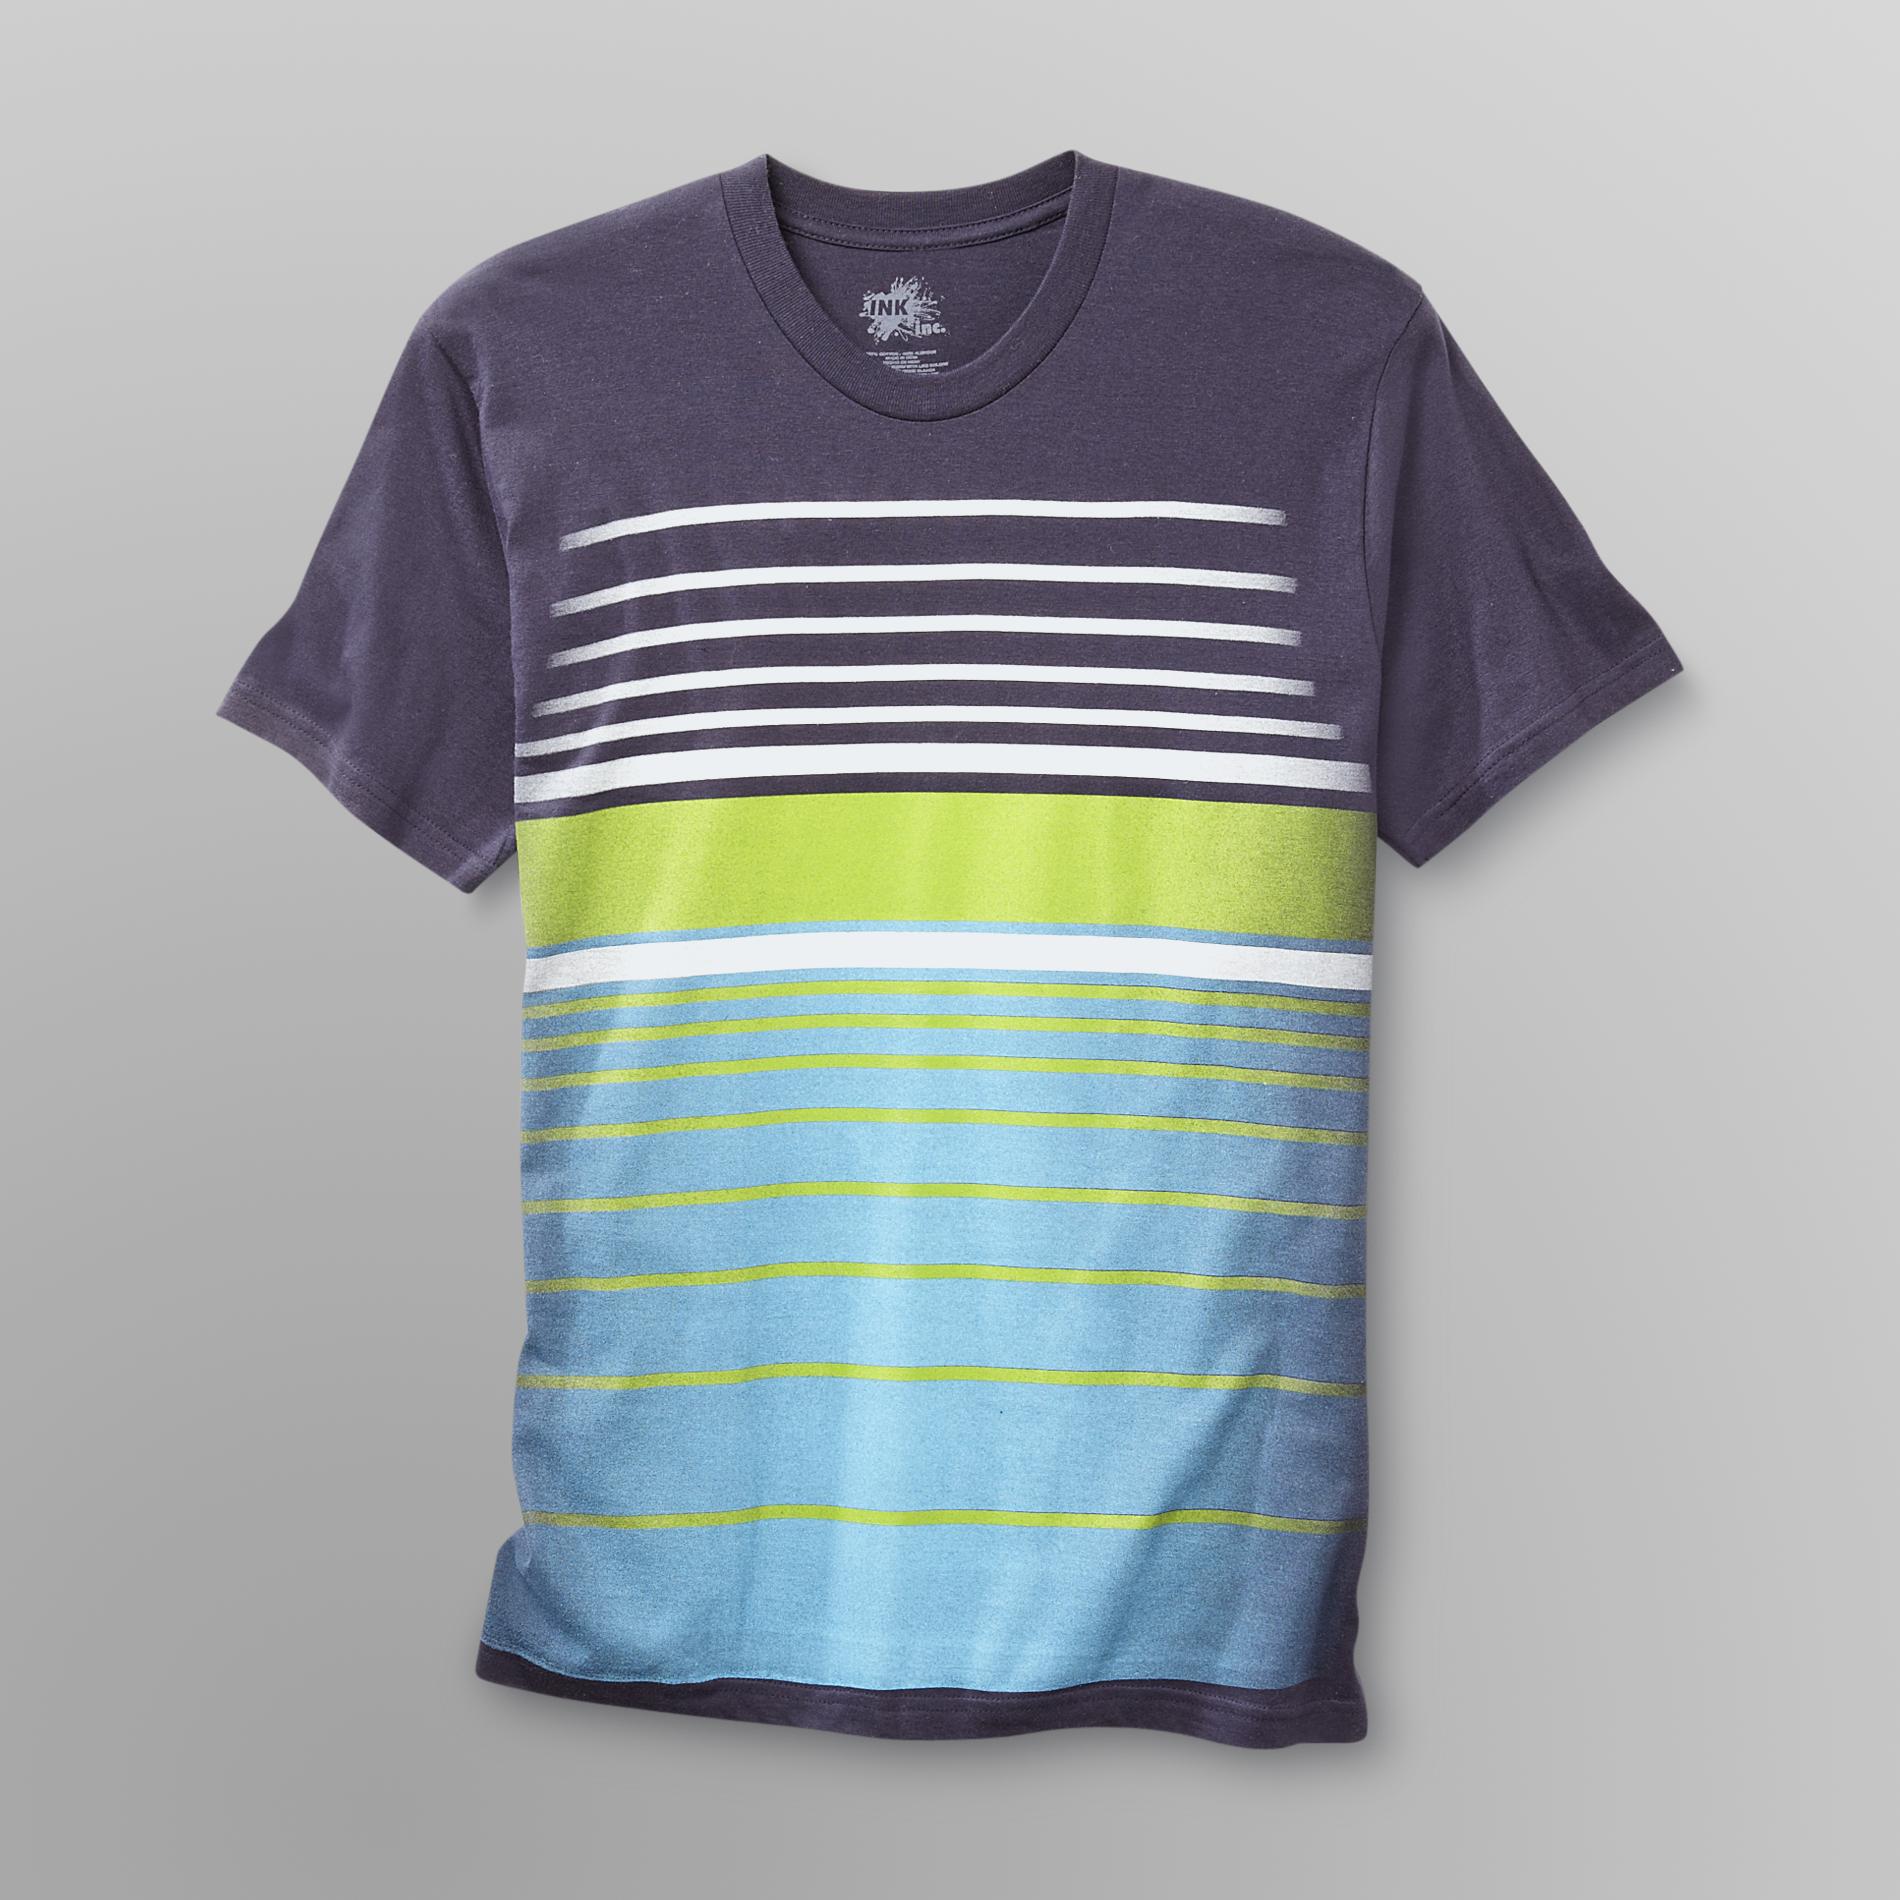 Young Men's Variegated Stripe T-Shirt